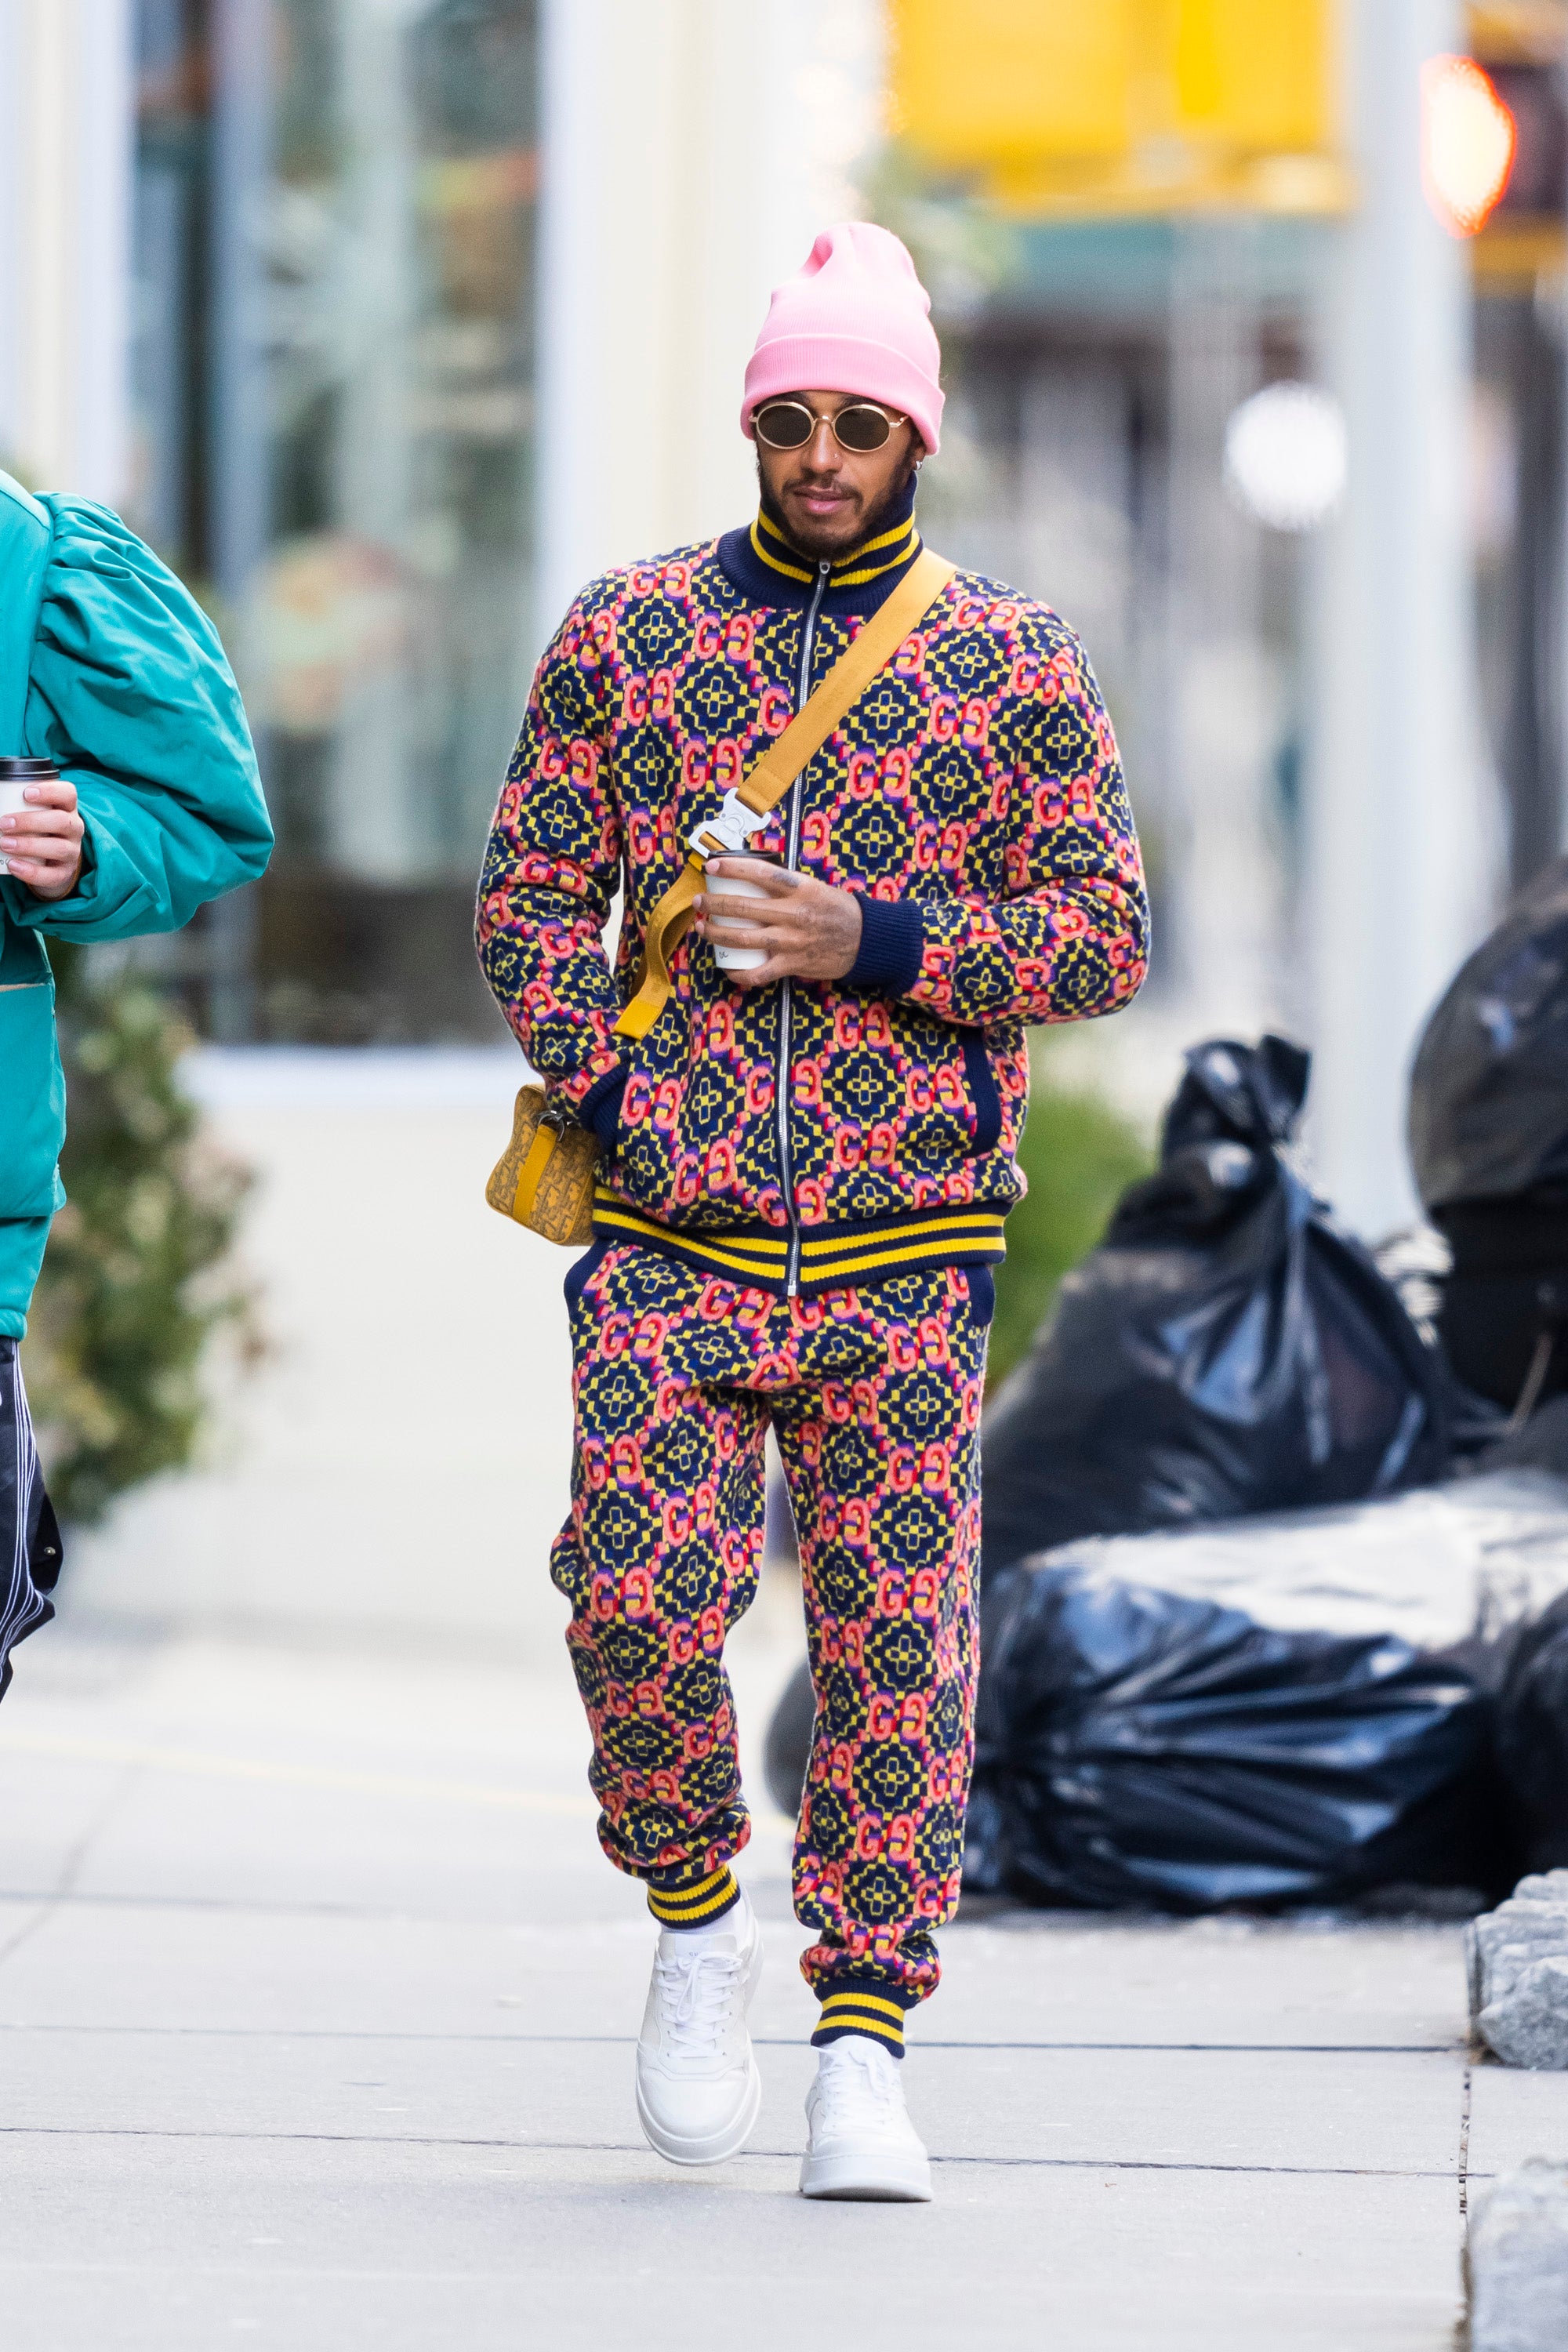 Be Honest: Would You Wear Lewis Hamilton's Gucci Outfit? | The Drive